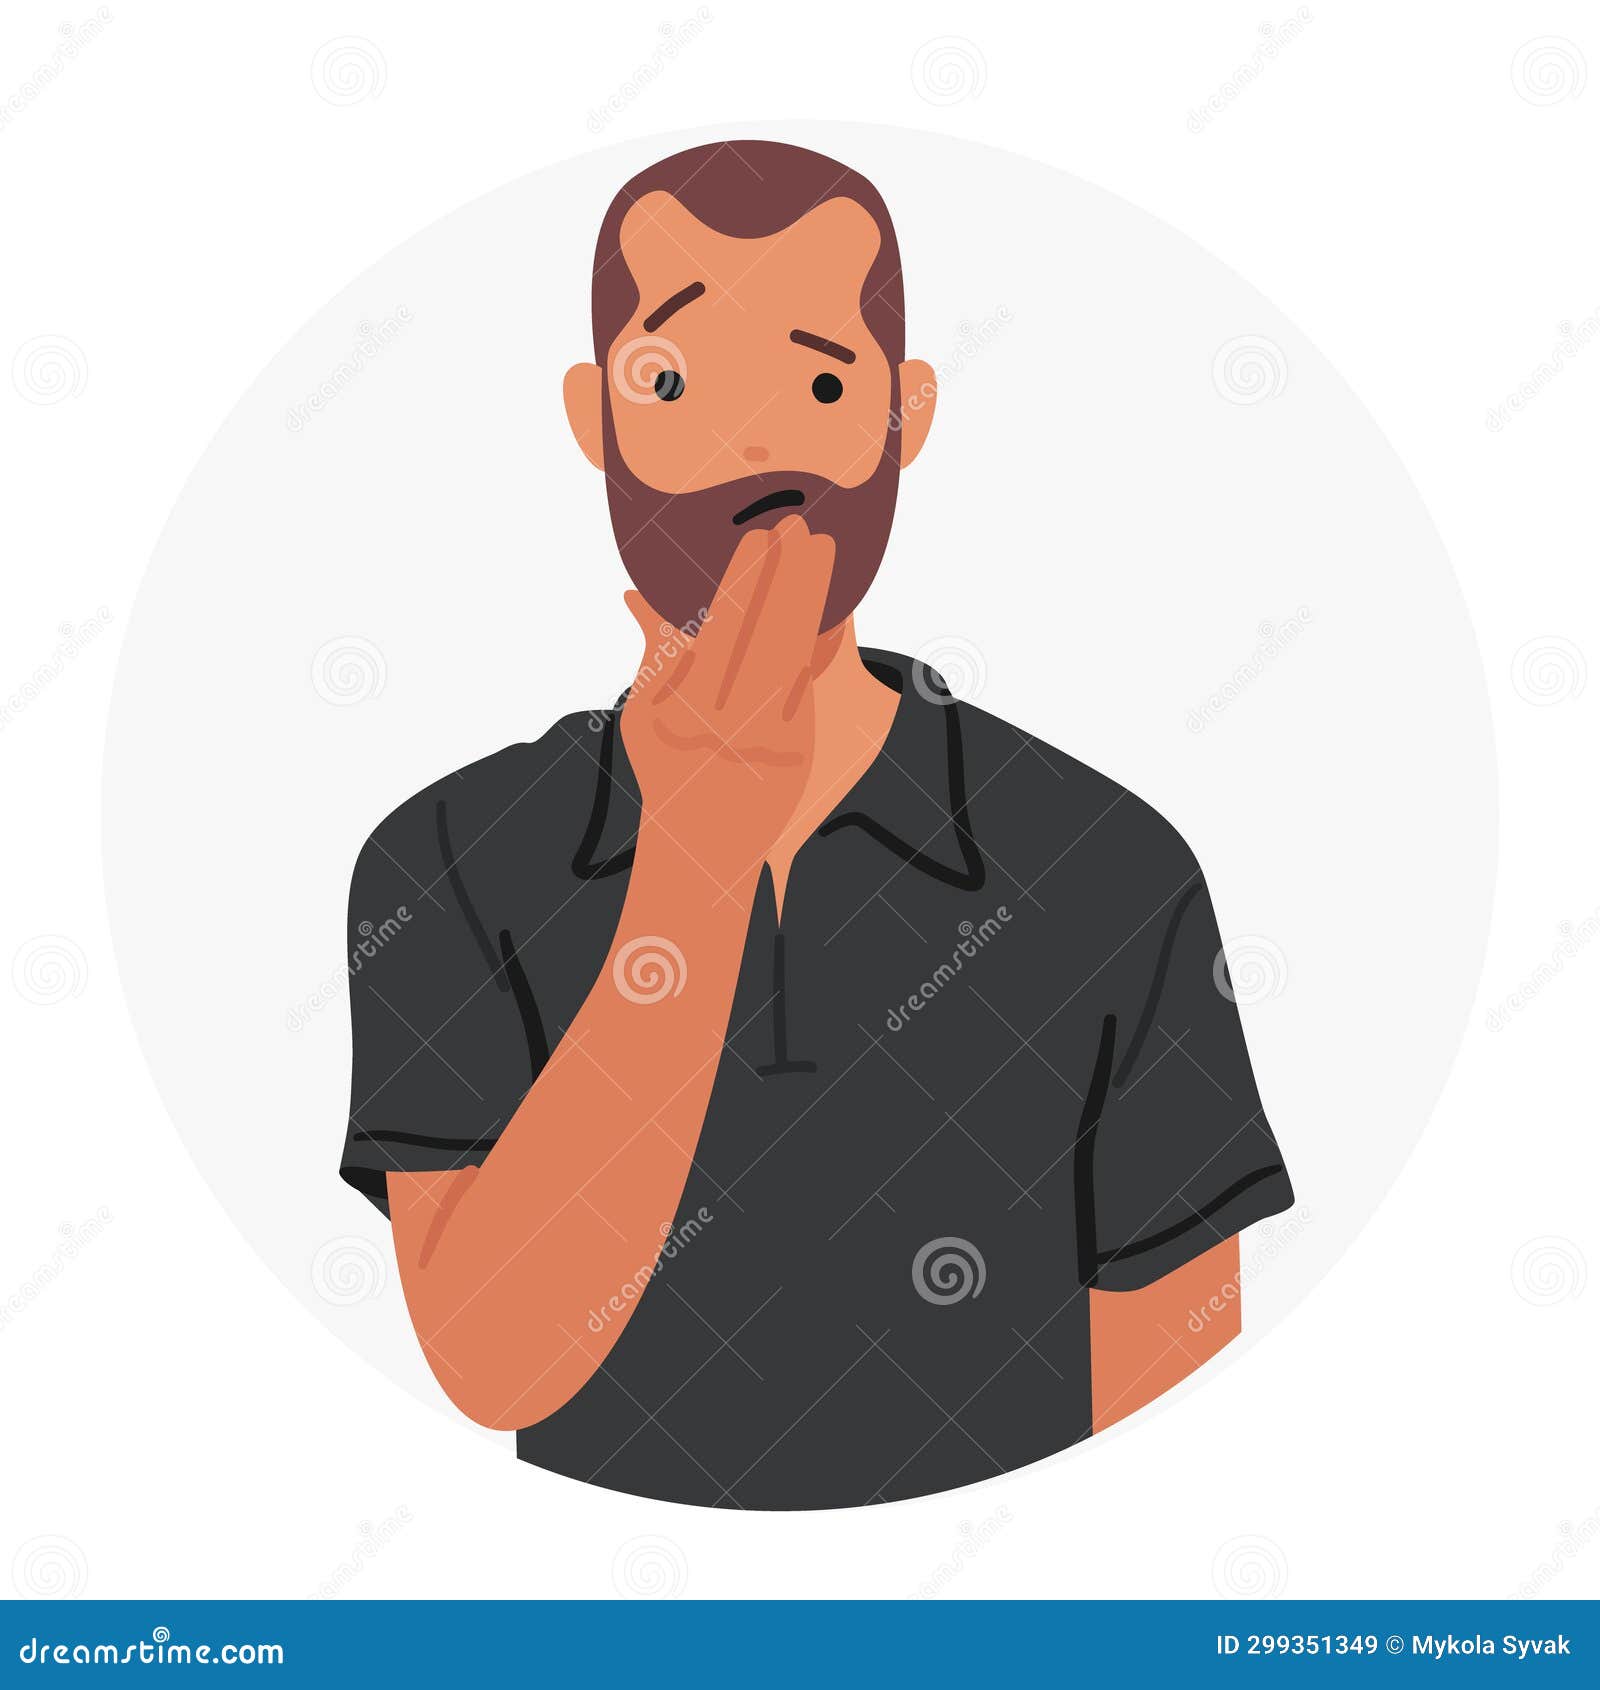 man with a pallor complexion, clutching his face in distress, exhibits symptoms of a heart attack, cartoon 